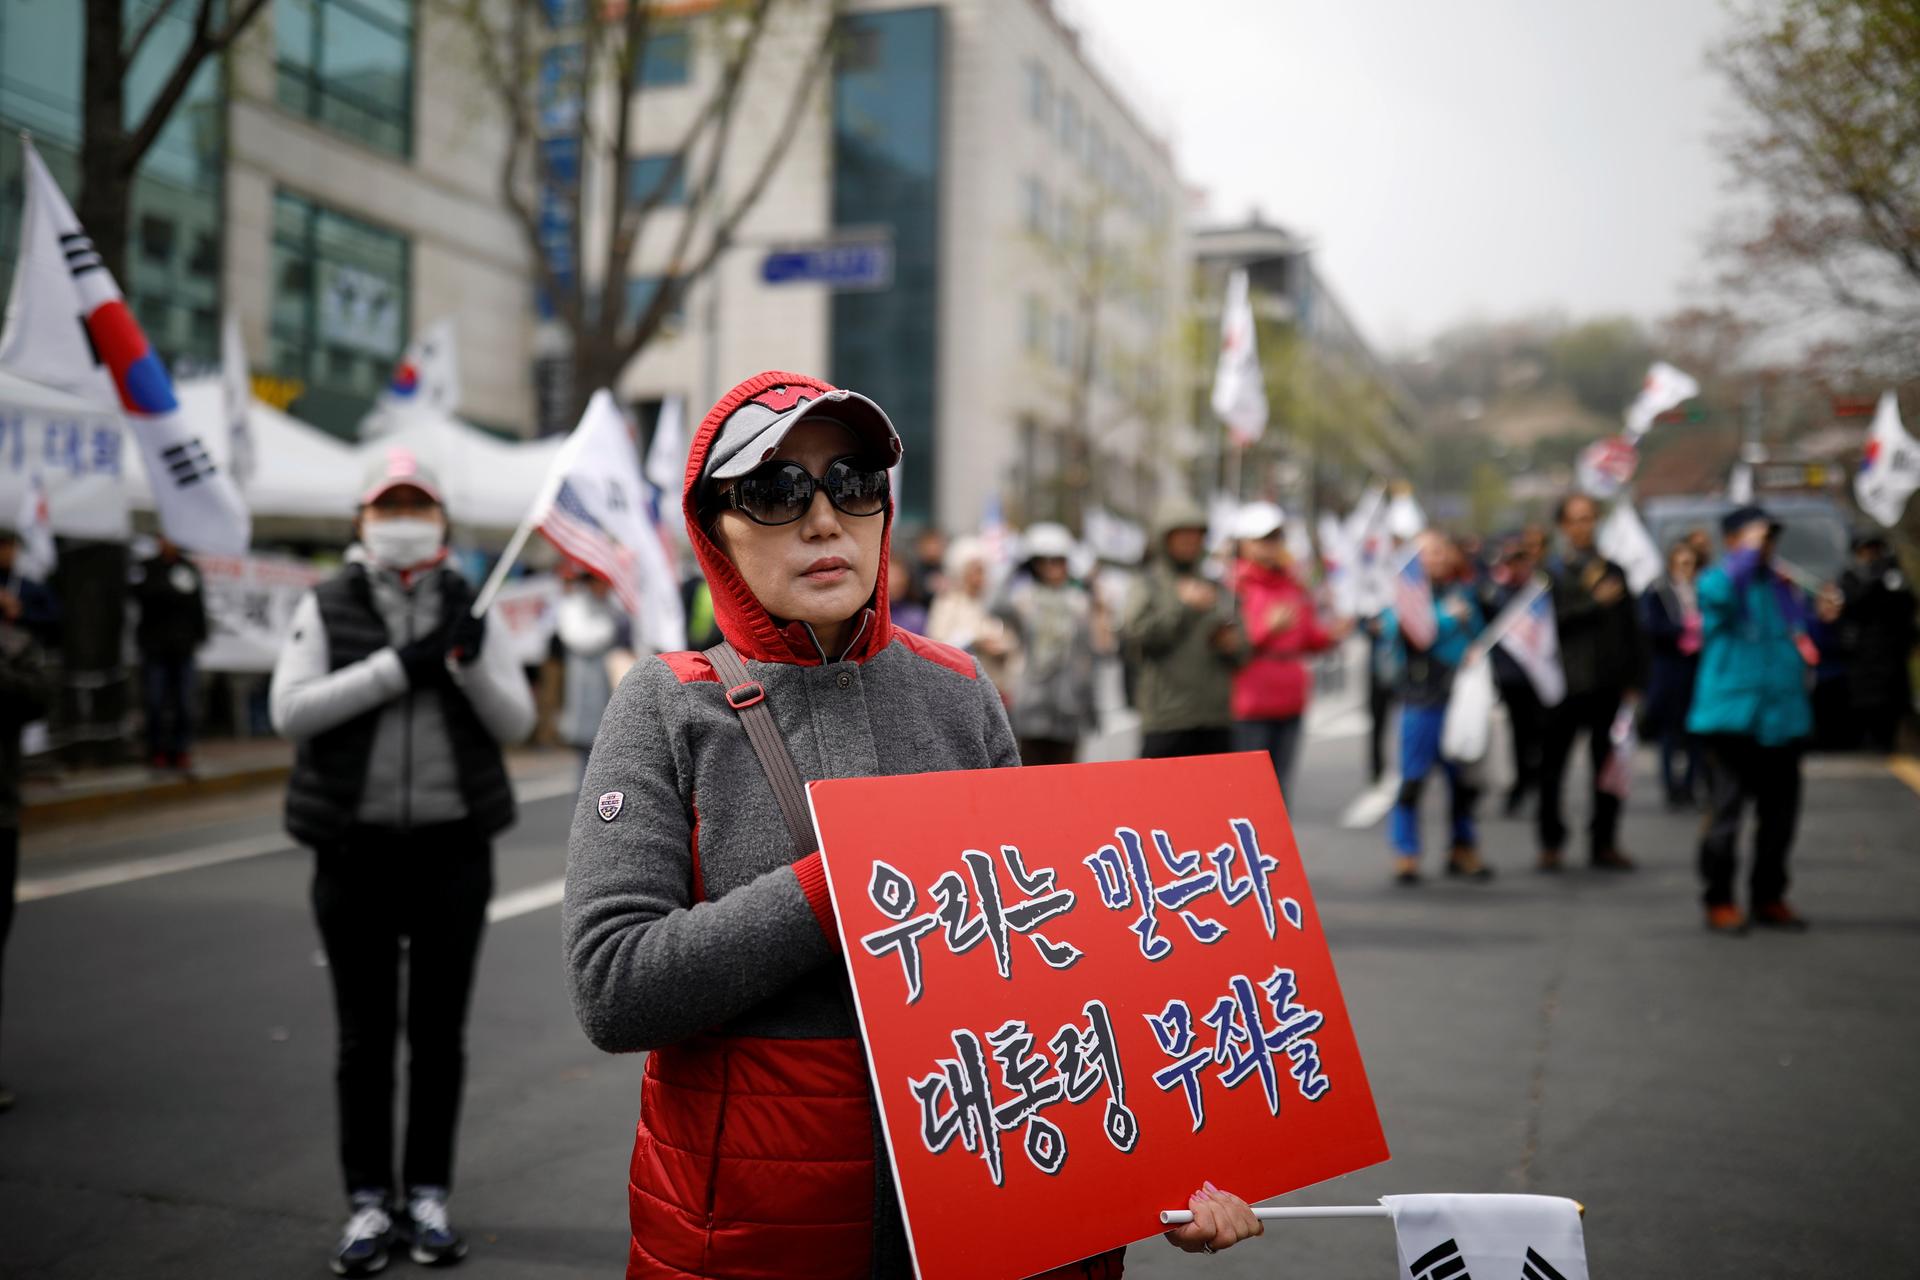 Members of a conservative civic group carry South Korean flags and placards in a street protest to support ousted President Park Geun-hye.